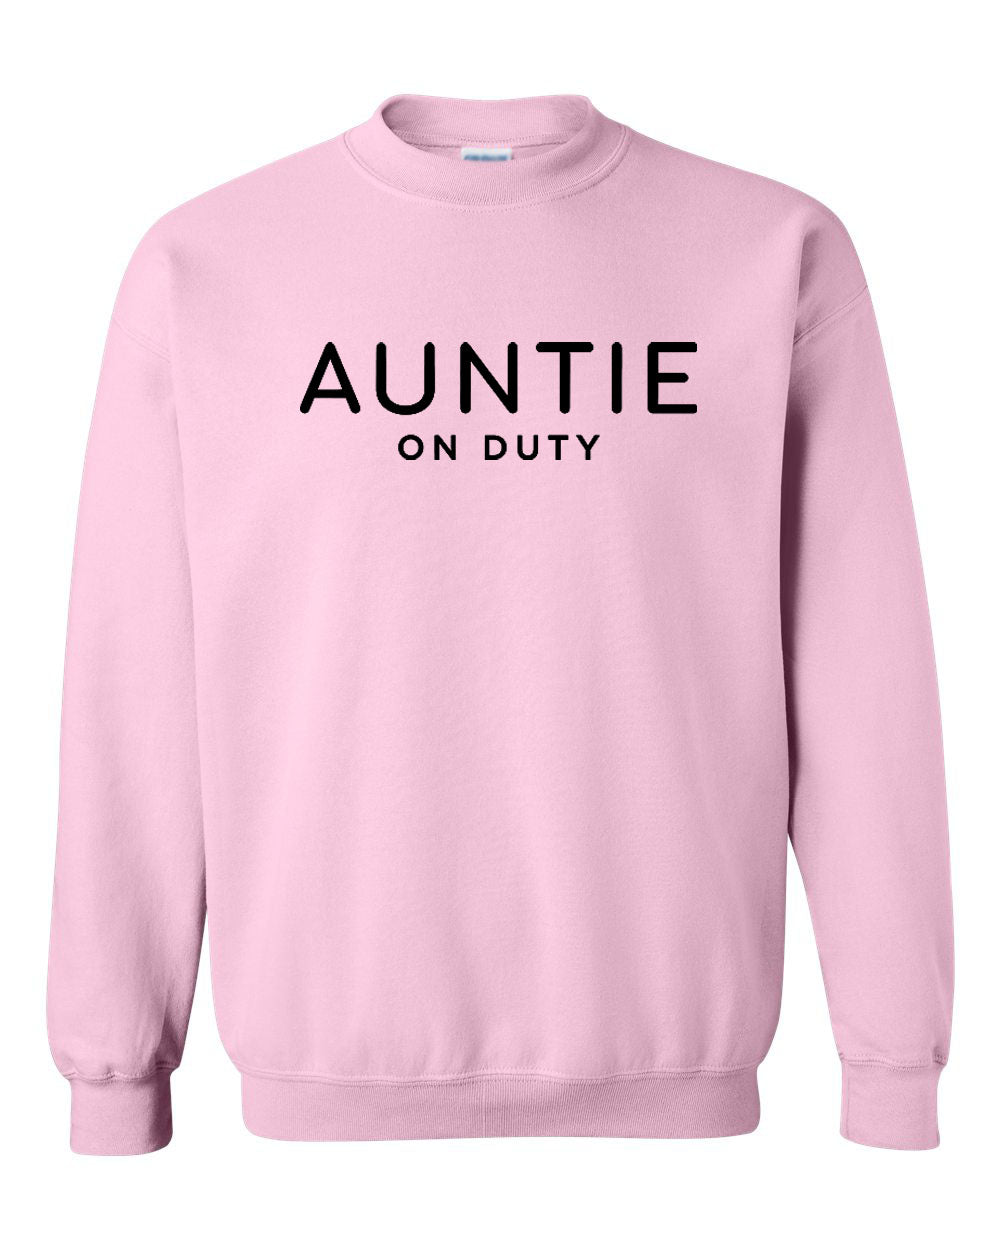 Auntie On Duty Soft Life Collection Sand Sweatshirt Hoodie